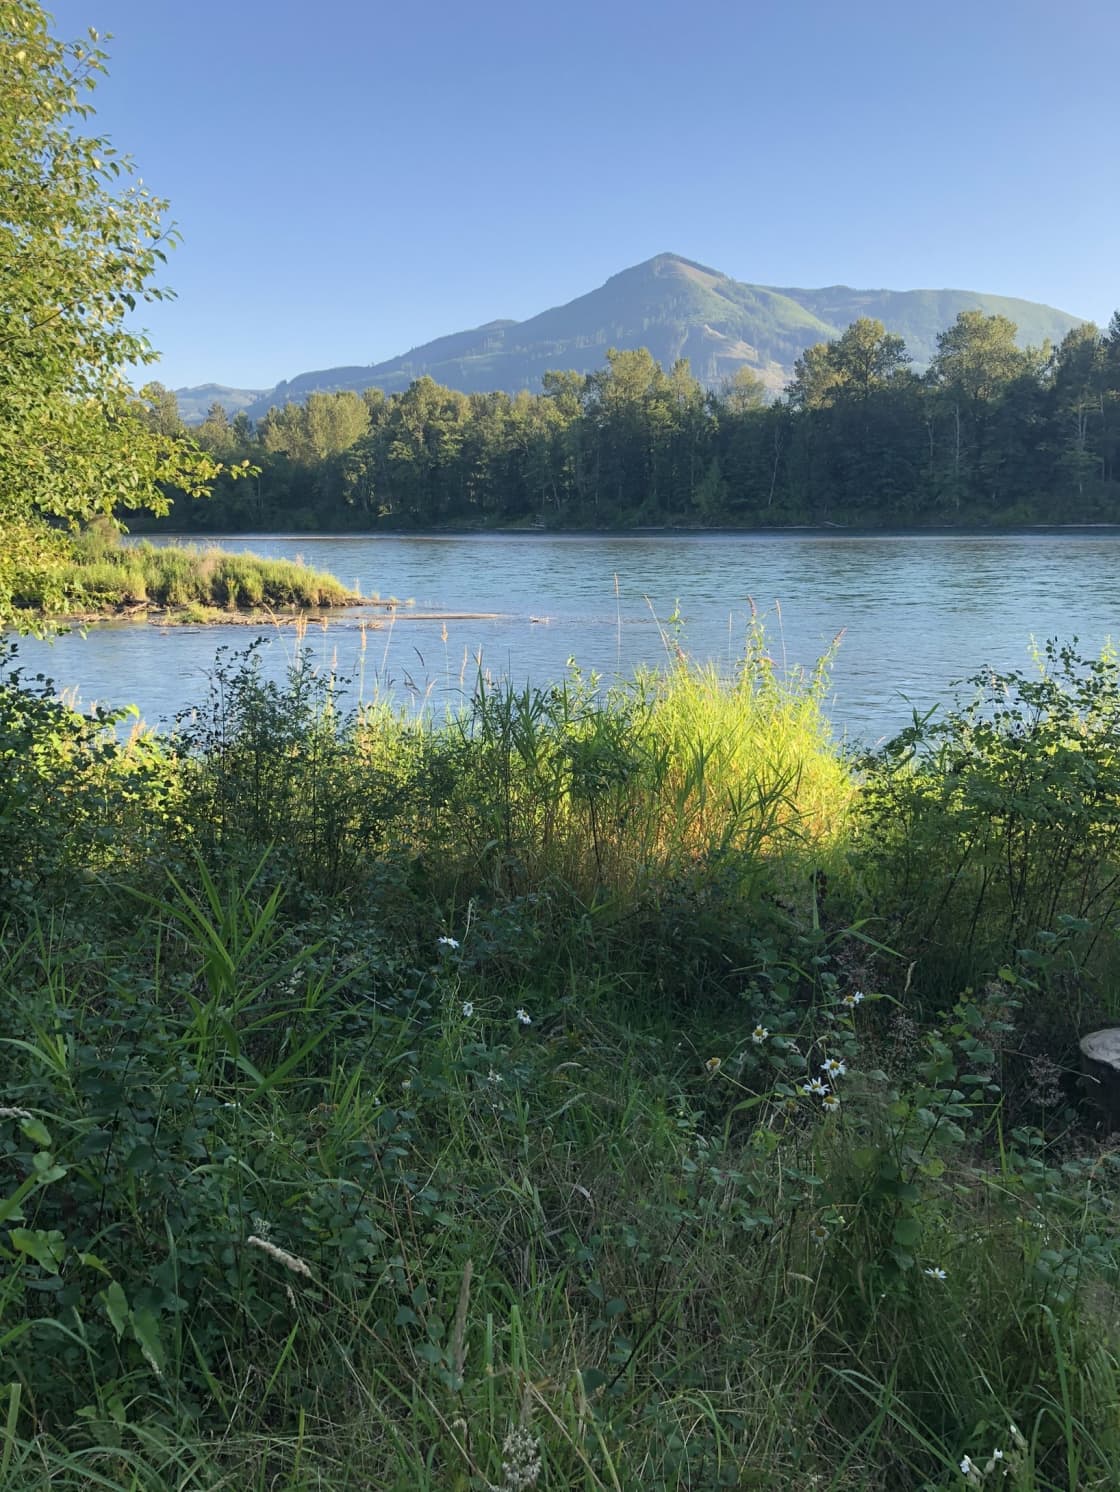 Camping on the Skagit River